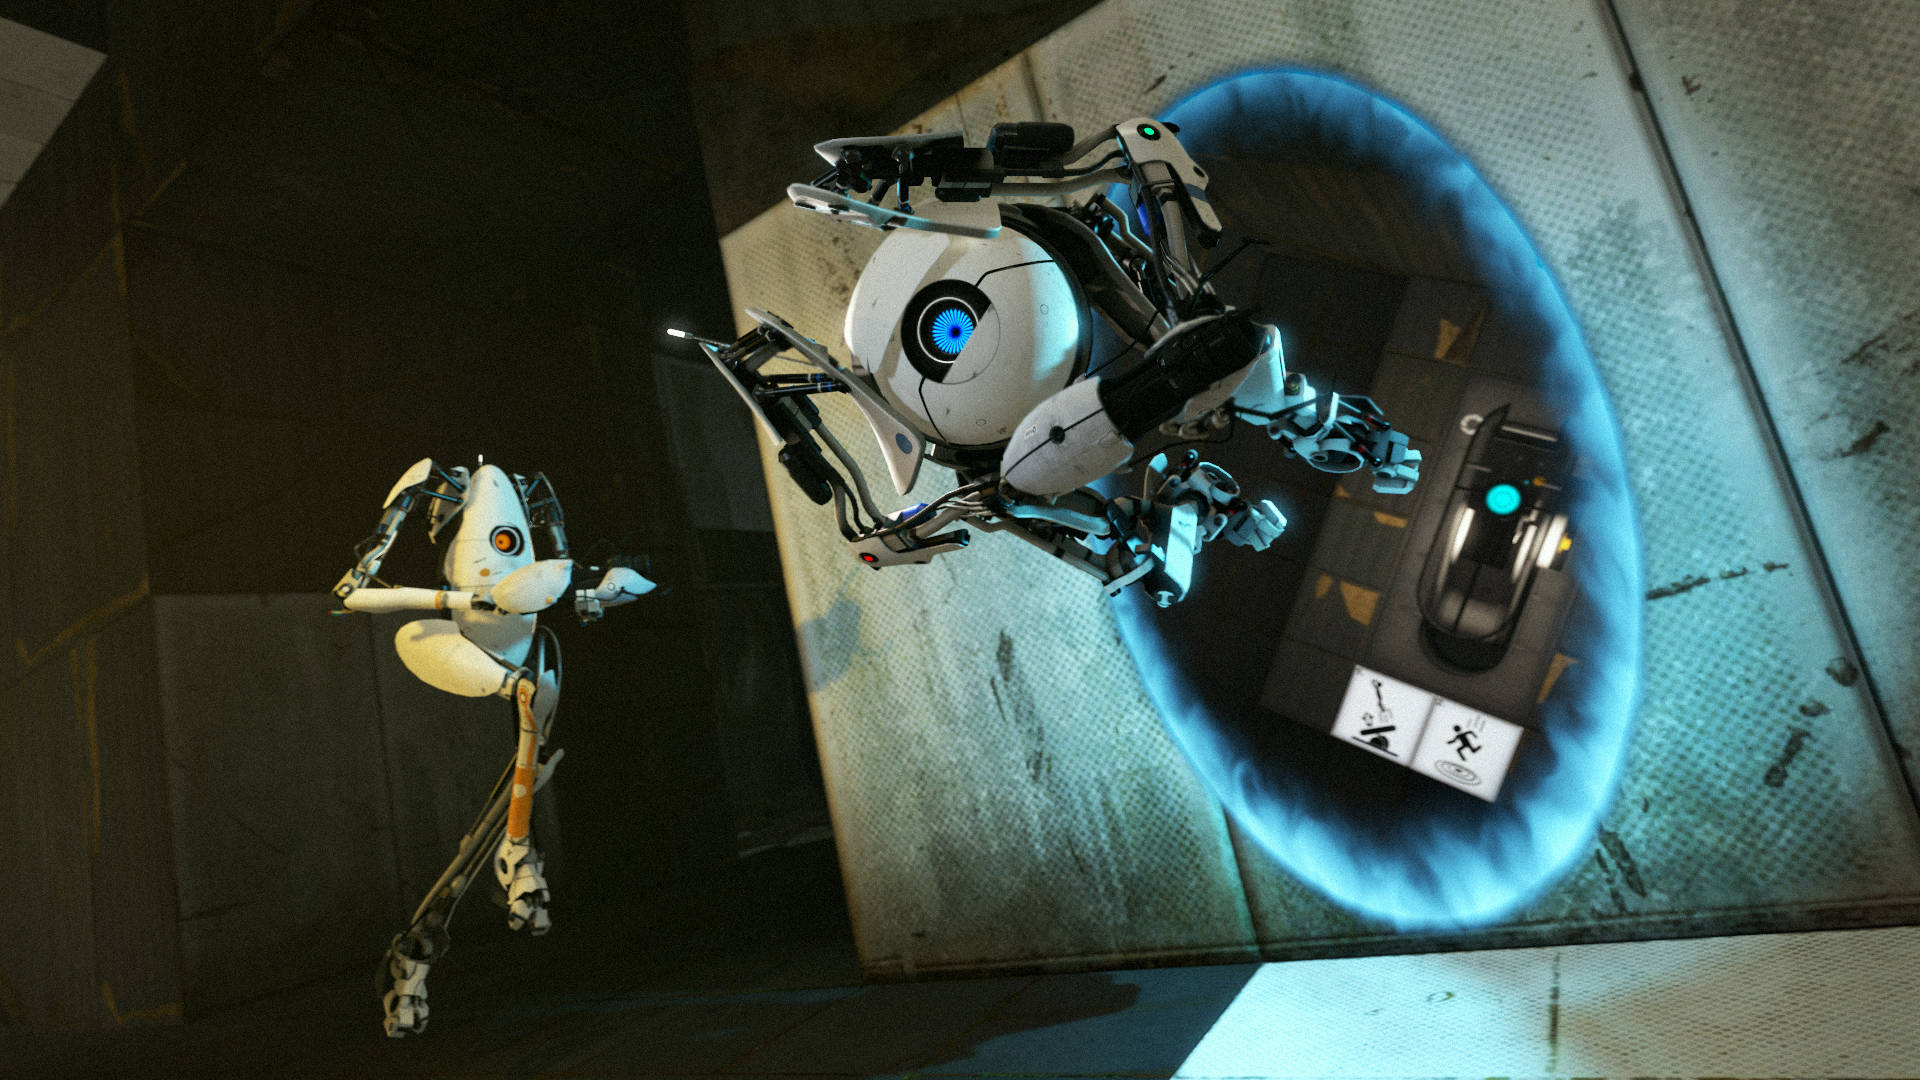 Combine the Aperture Science Puzzle Maker with the Aperture Science Dual Screen Wallpaper